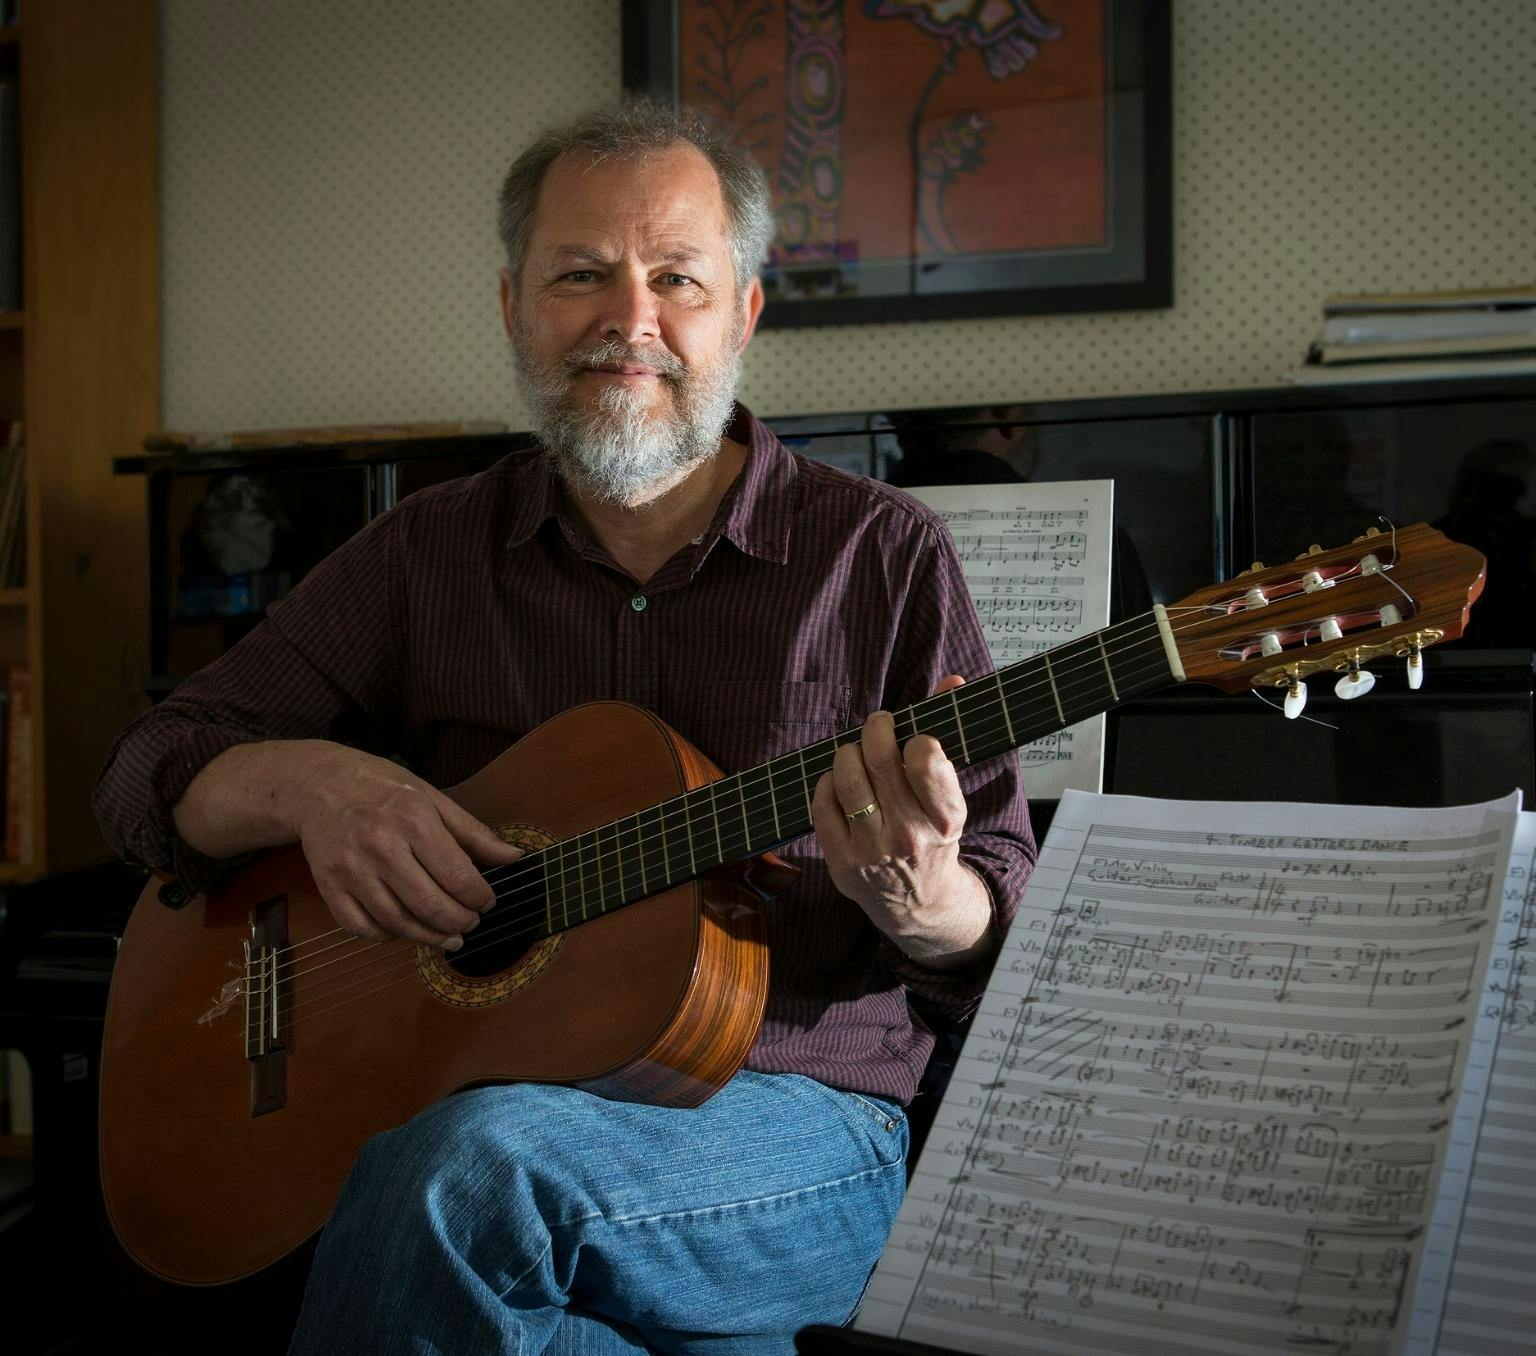 Christopher is wearing a maroon collared shirt and blue jeans. He is sitting on a chair and holding a wooden guitare. He is smiling at the camera. next to him is a music stand with music.